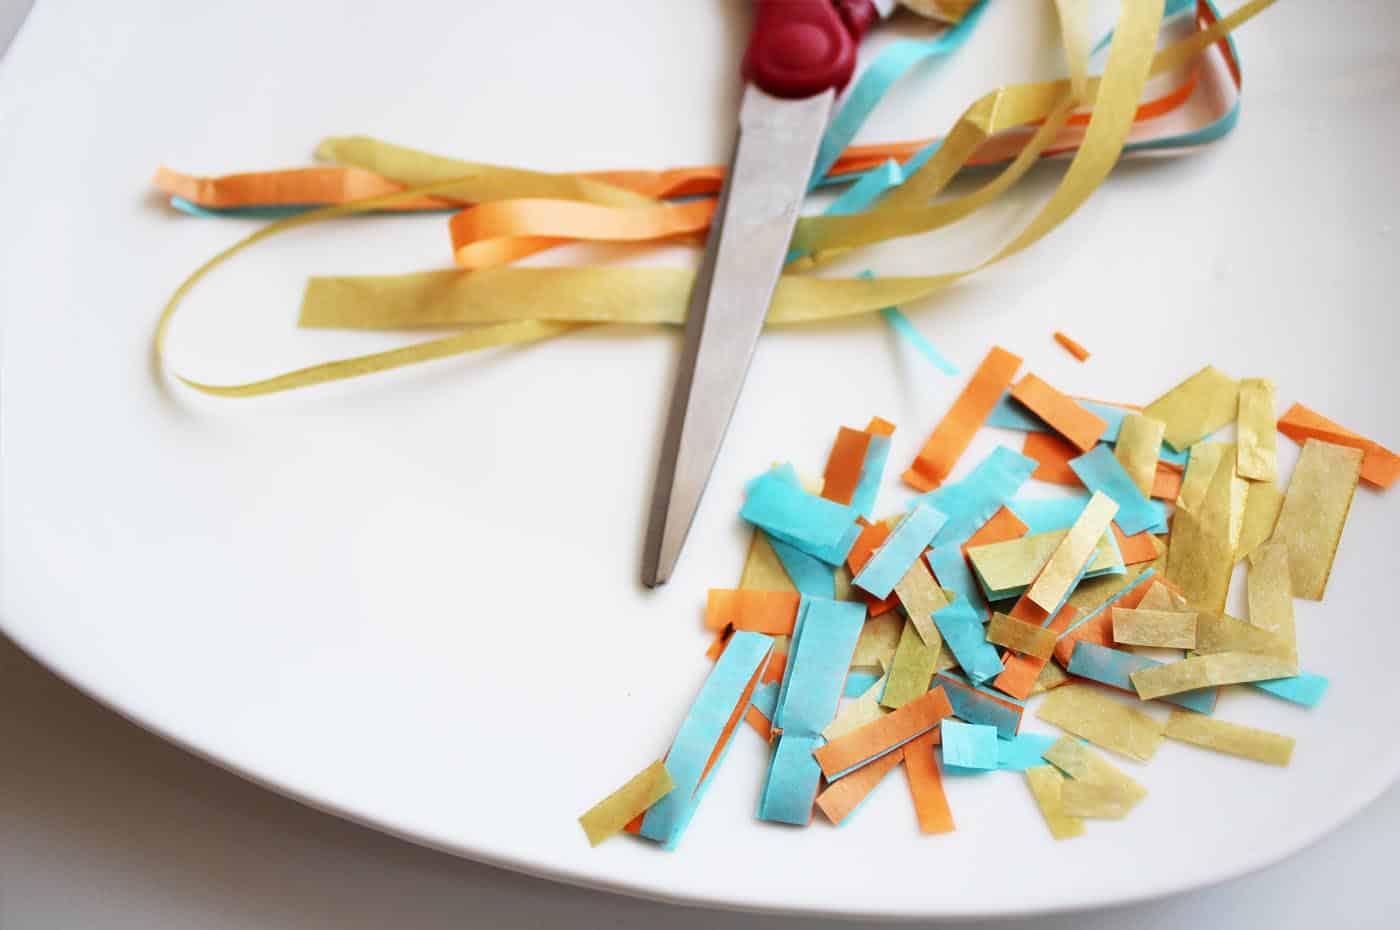 Tissue paper cut into thin strips with scissors